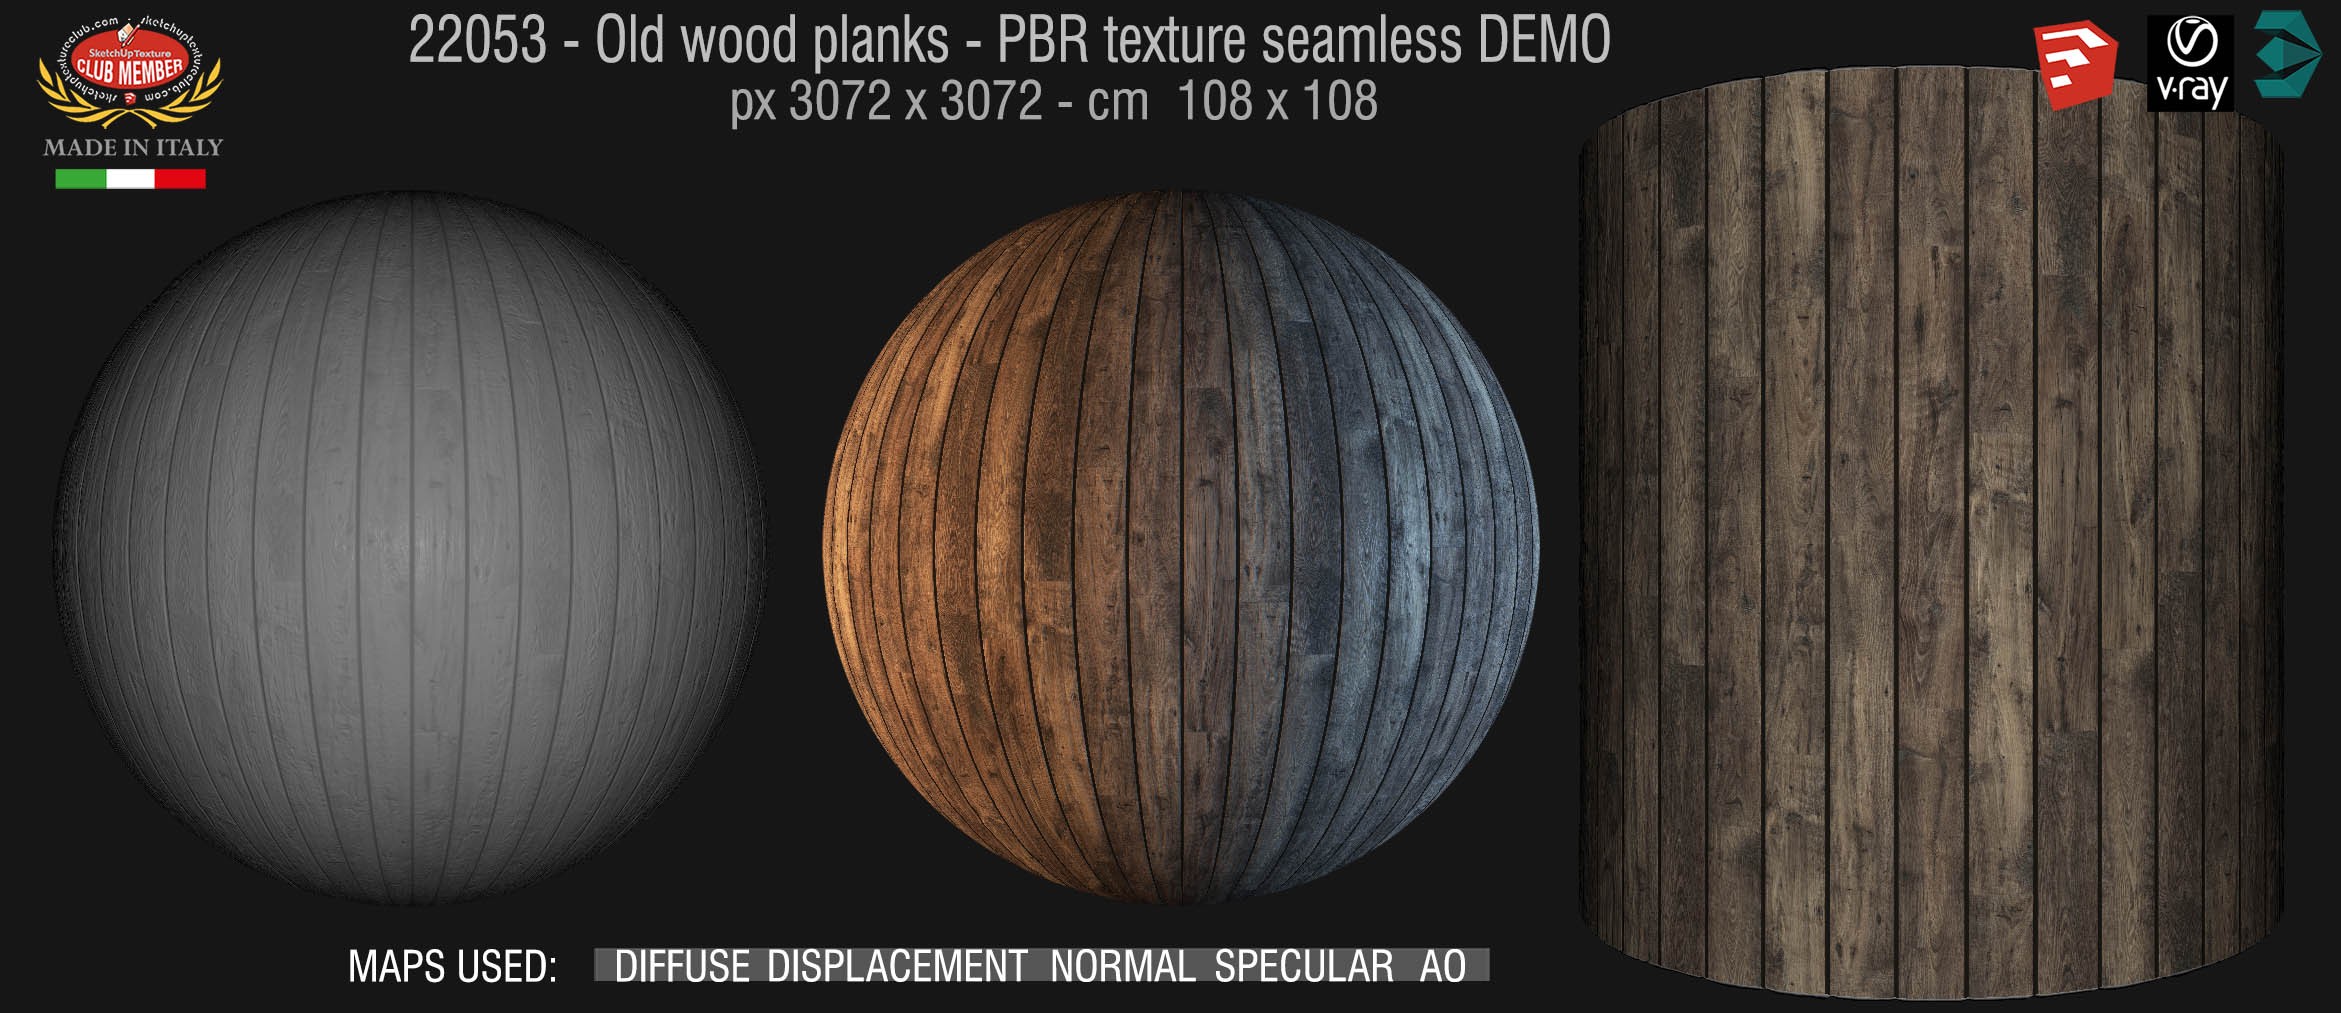 22052 Old wood planks PBR texture seamless DEMO